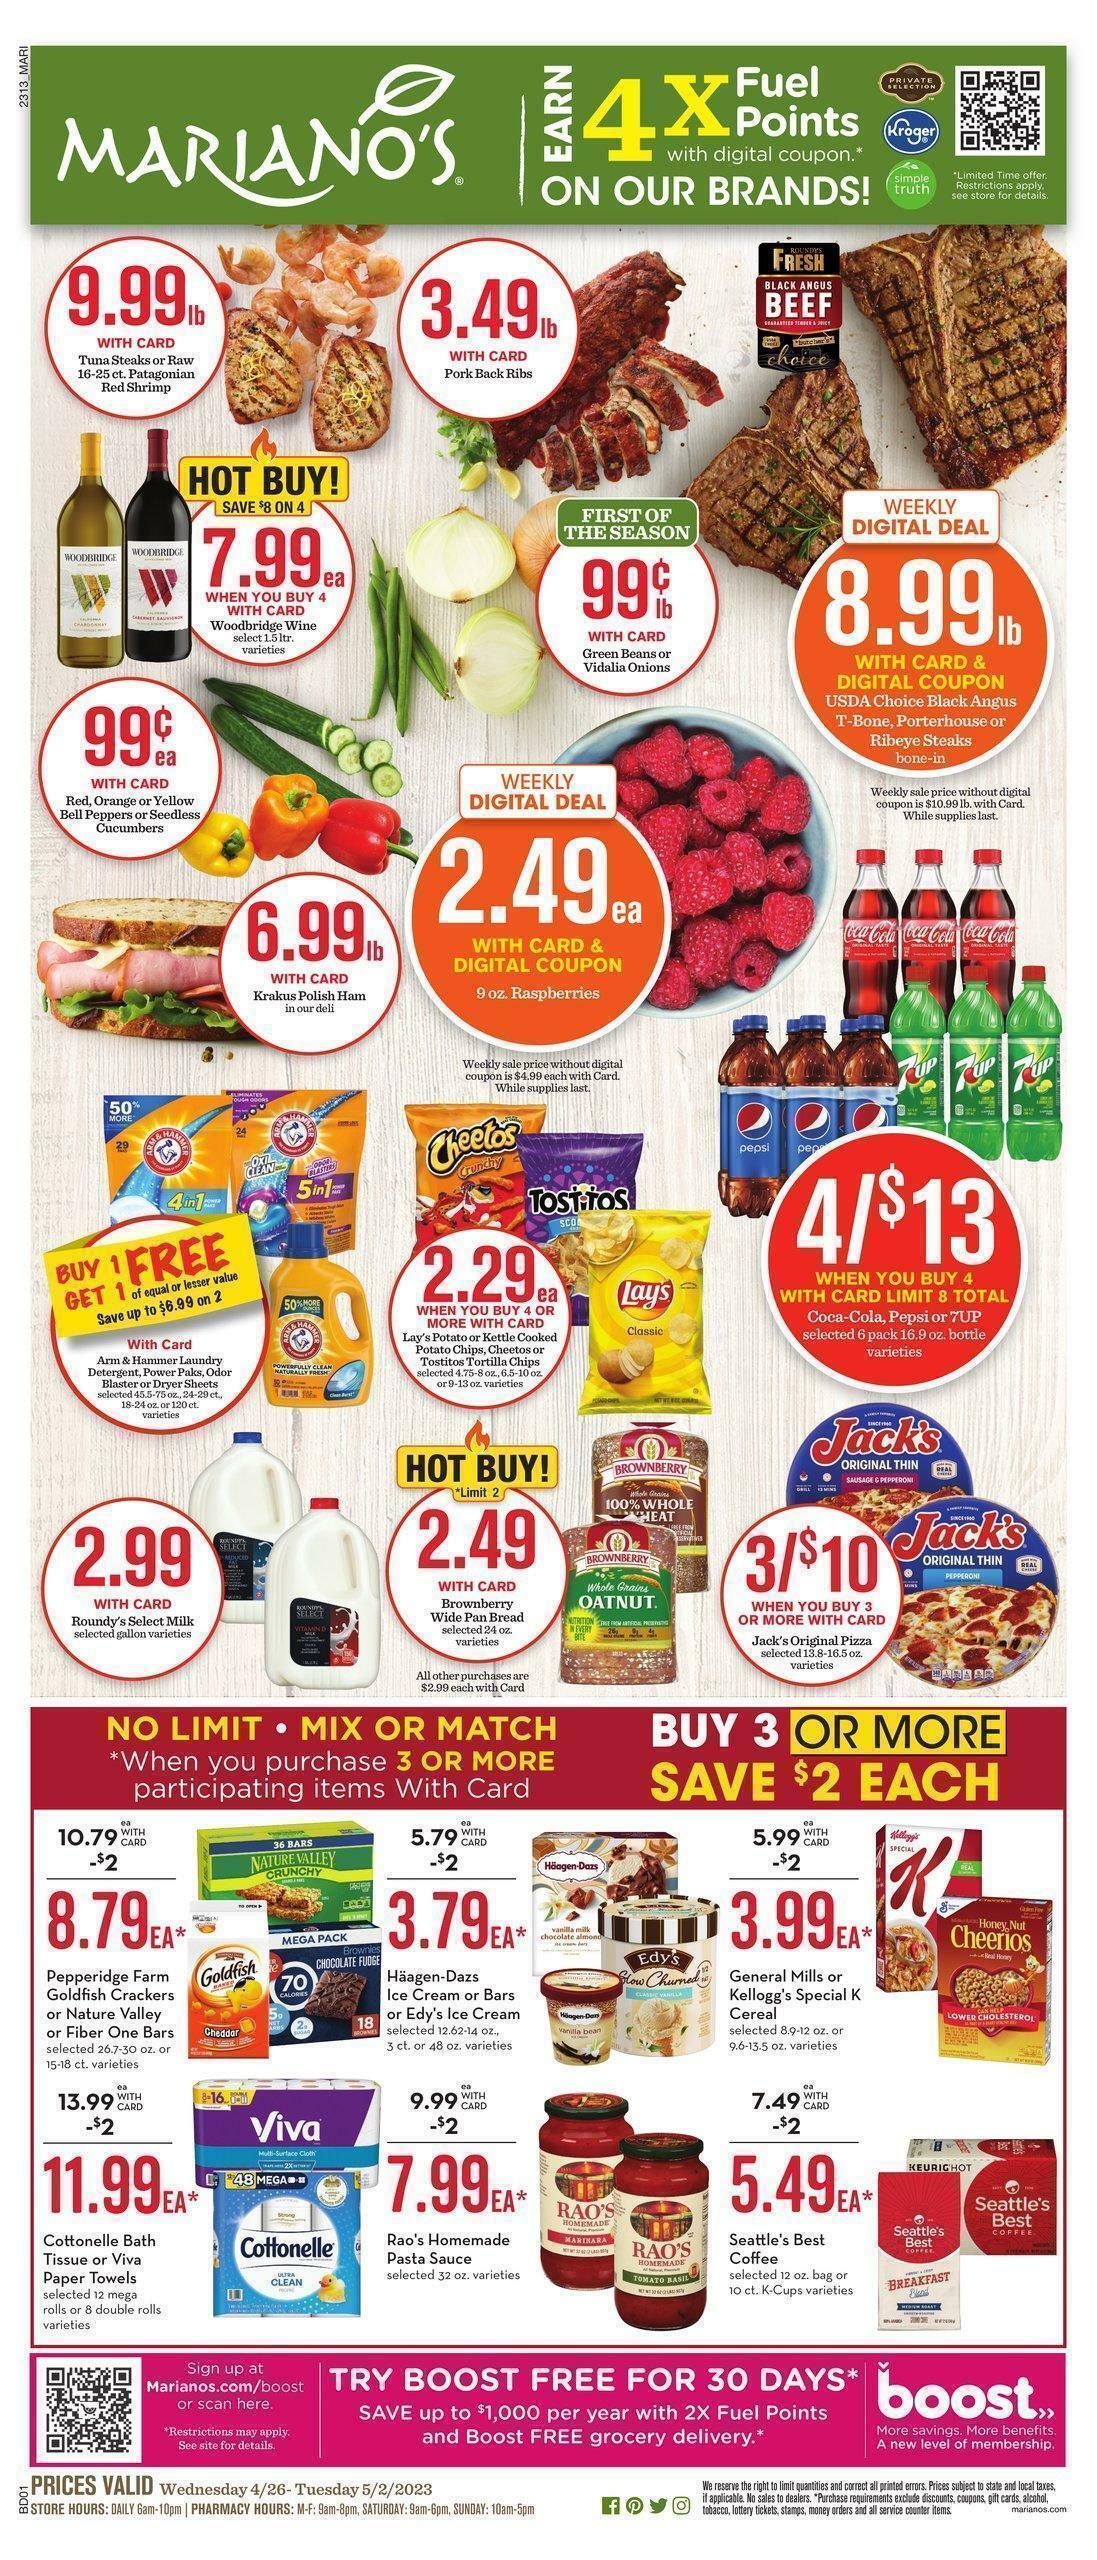 Mariano's Weekly Ad from April 26